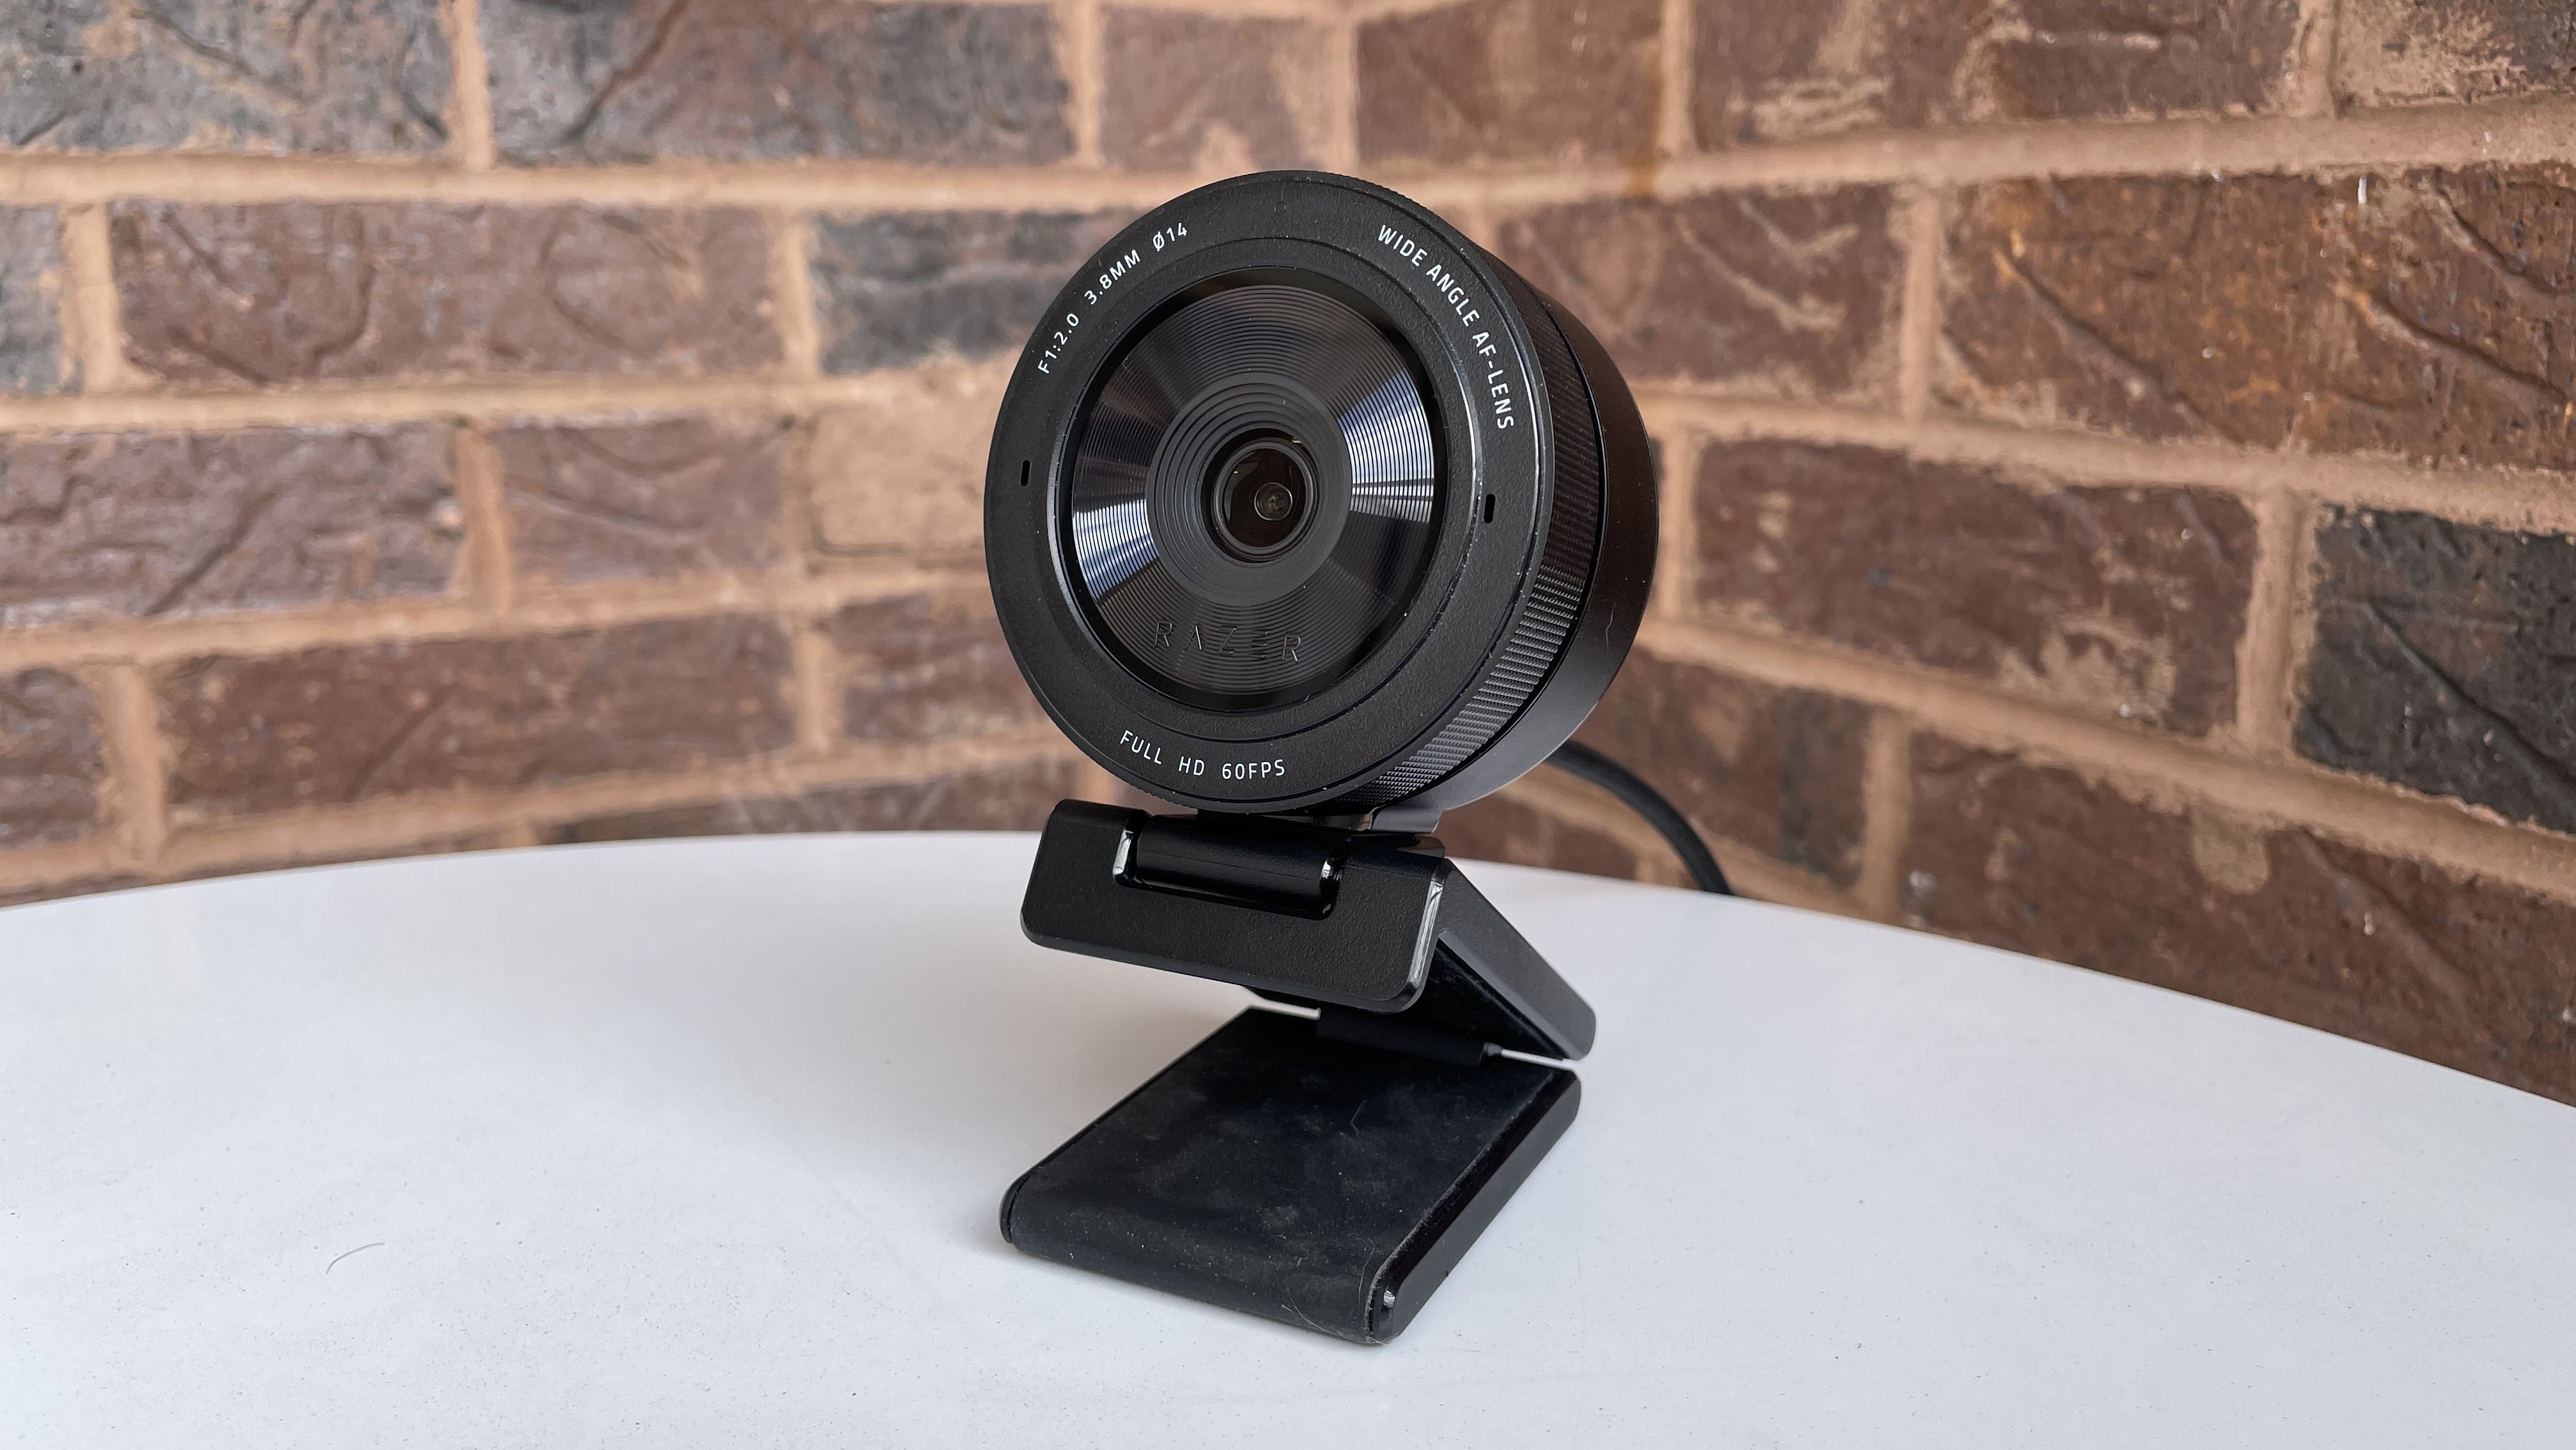 Webcam 1080p 60fps • Compare & find best prices today »